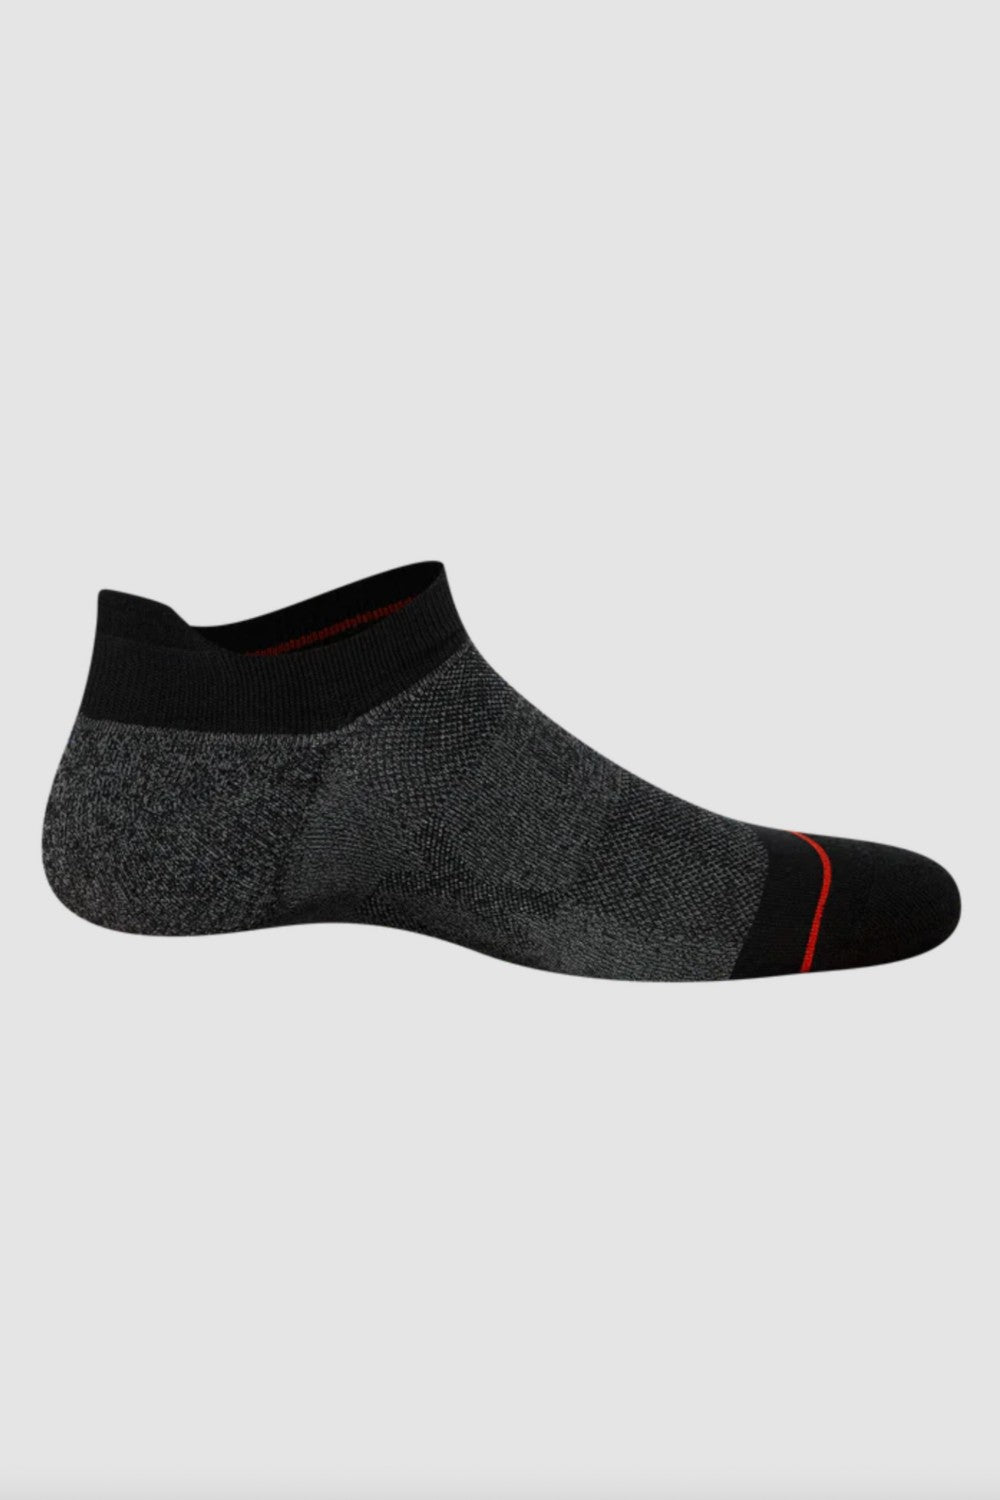 The Whole Package is an everyday pair supercharged with performance features. Its yarn blend wicks sweat and fights stanky feet, while its cushioned construction offers exceptional comfort for all-day wear. Seriously. It’s right there in the name. This sock is the Whole Package.